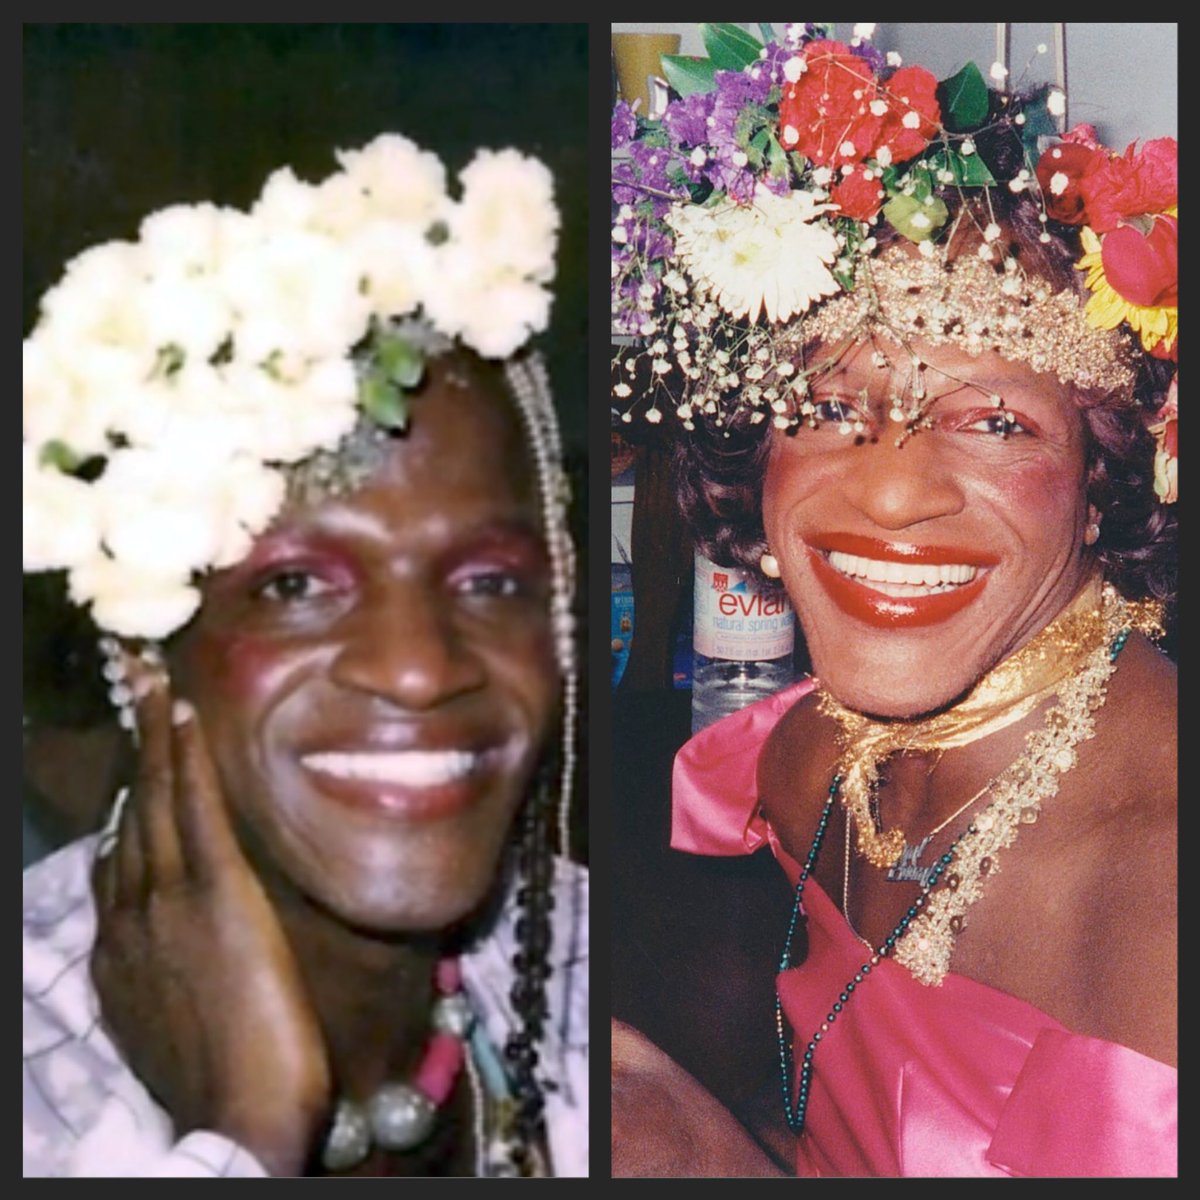 Marsha P. Johnson was a Black transgender woman and an activist. Marsha is most known for the role she played in the riots of Stonewall. She is alleged to be the first person to throw a brick that began the uprising against police brutality. #BlackHistoryMonth    #BlackHerstory